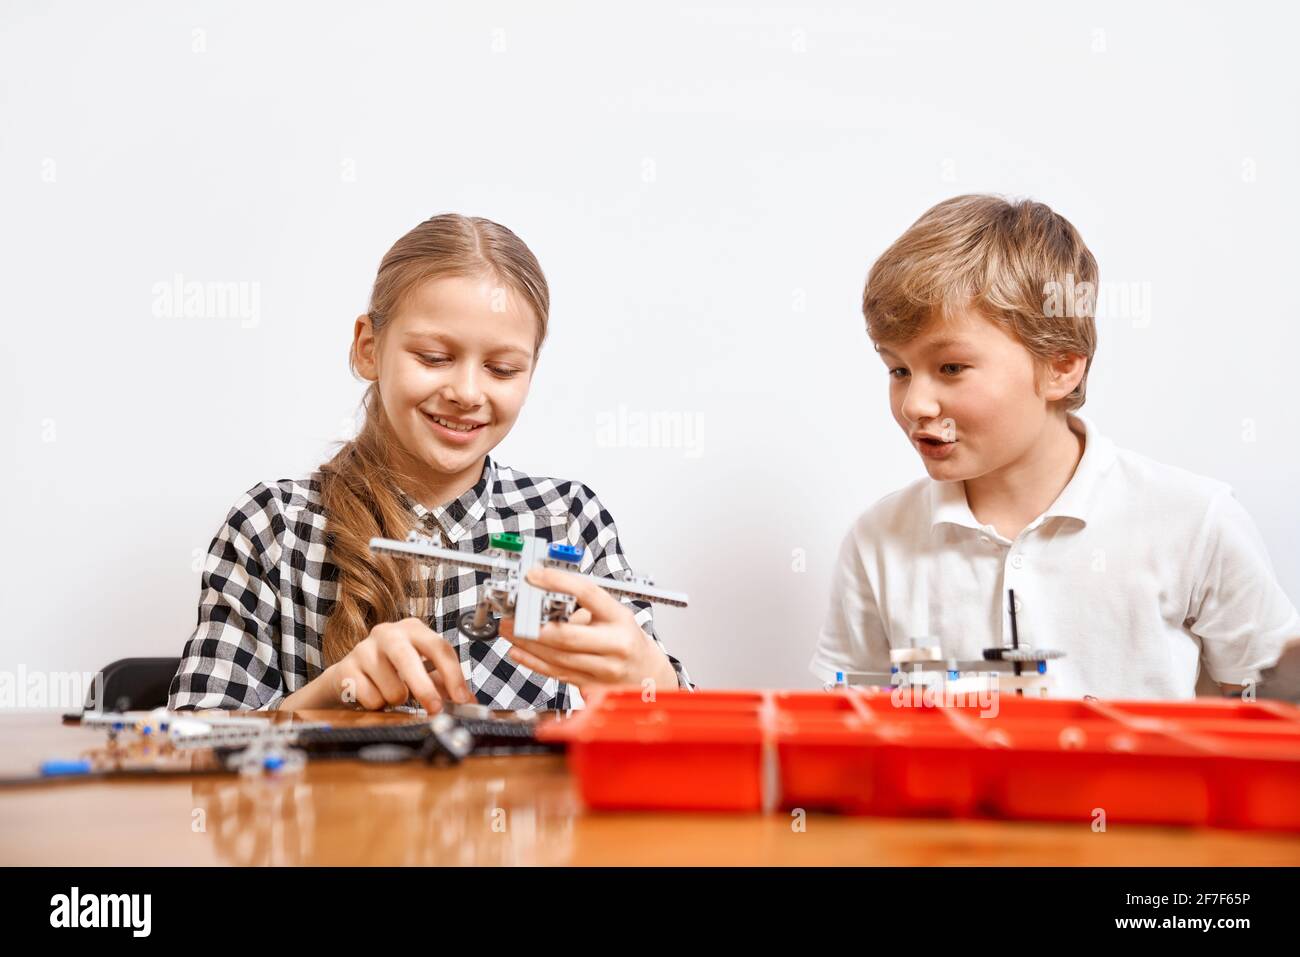 Interesting building kit for kids on table. Front view of boy and girl having fun, creating air vehicle. Science engineering. Nice interested friends smiling, chatting and working on project together. Stock Photo